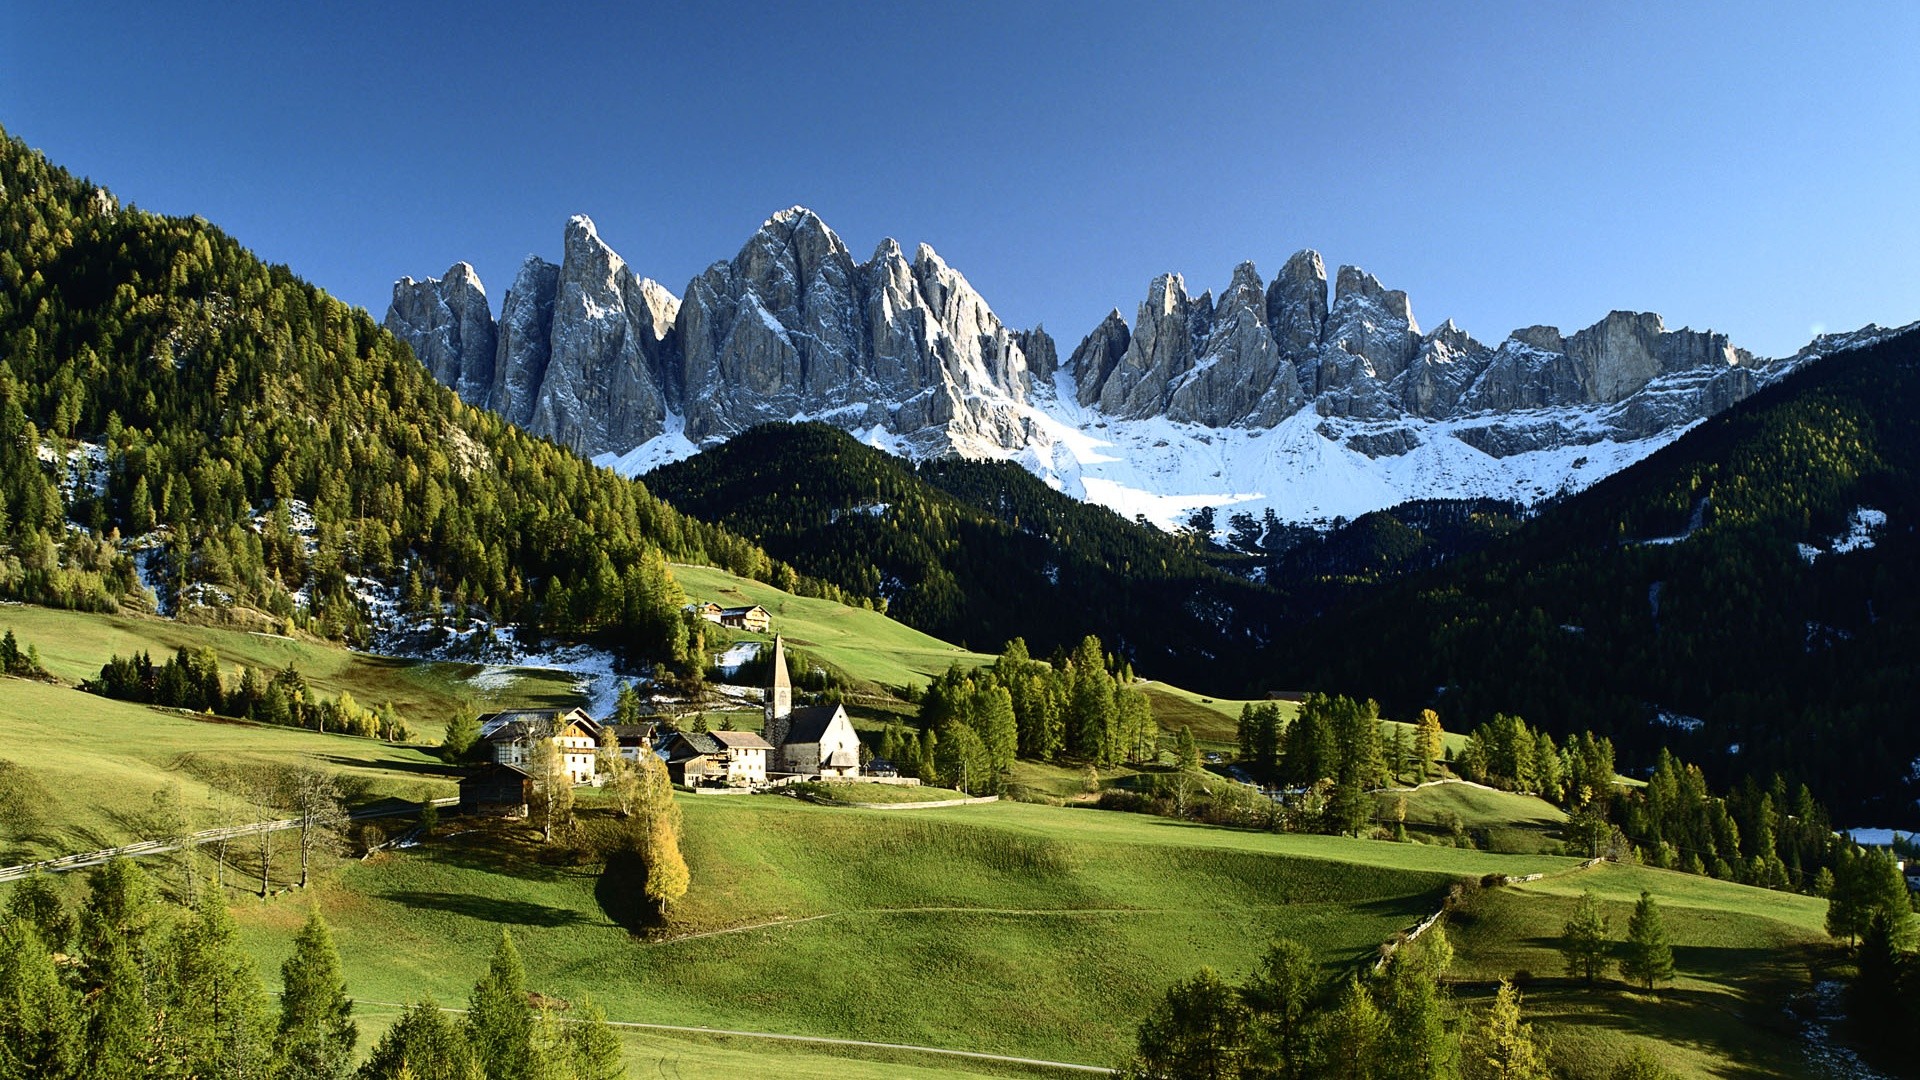 1920x1080 Italian countryside scenery, snow-capped mountains, green trees, houses  wallpaper  Full